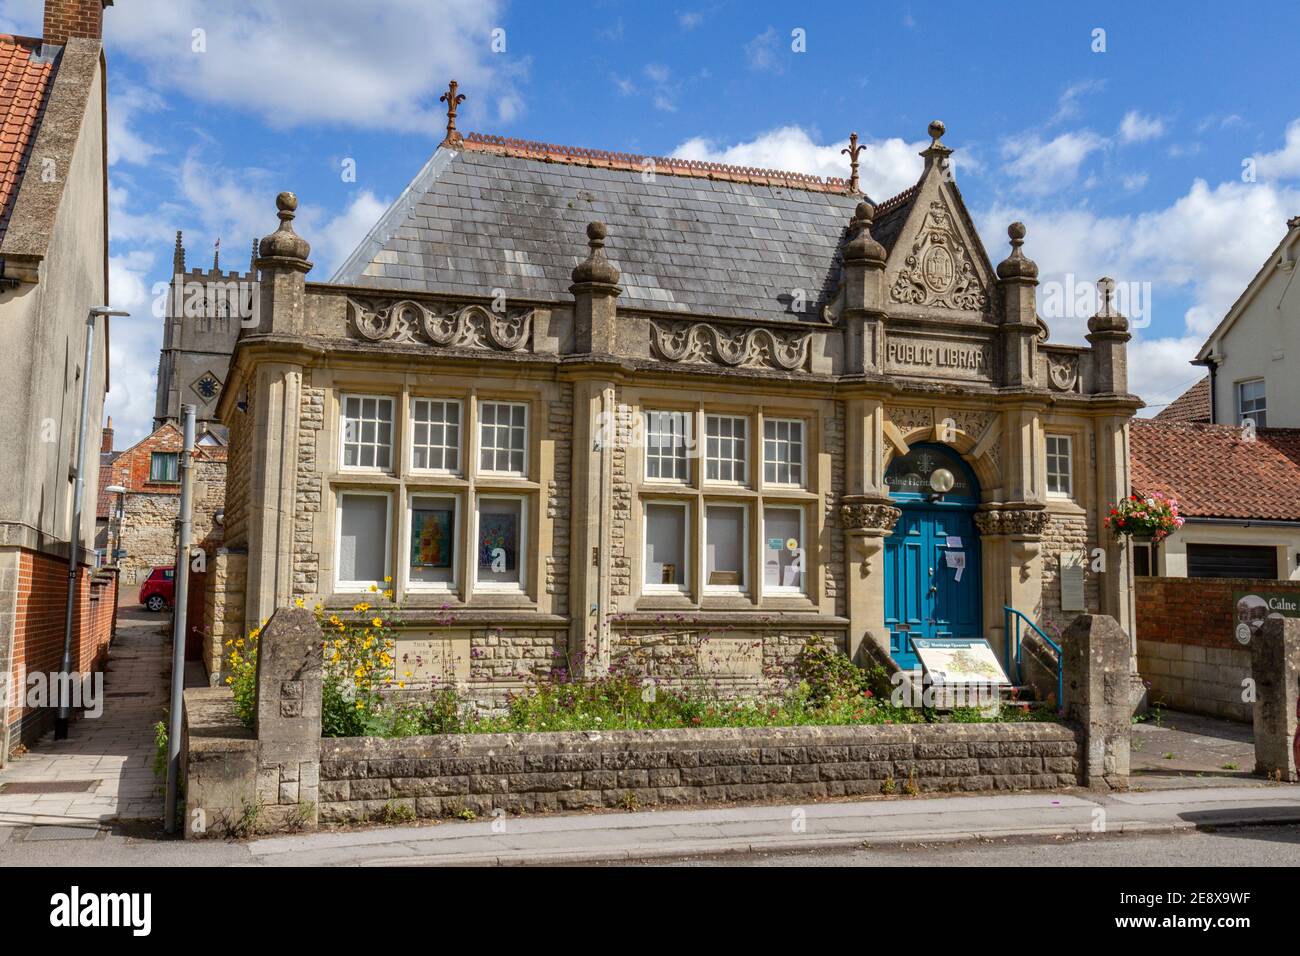 Calne Heritage Centre (in the former public library opened in 1905 & financed by the millionaire industrialist Andrew Carnegie), Calne, Wiltshire, UK. Stock Photo